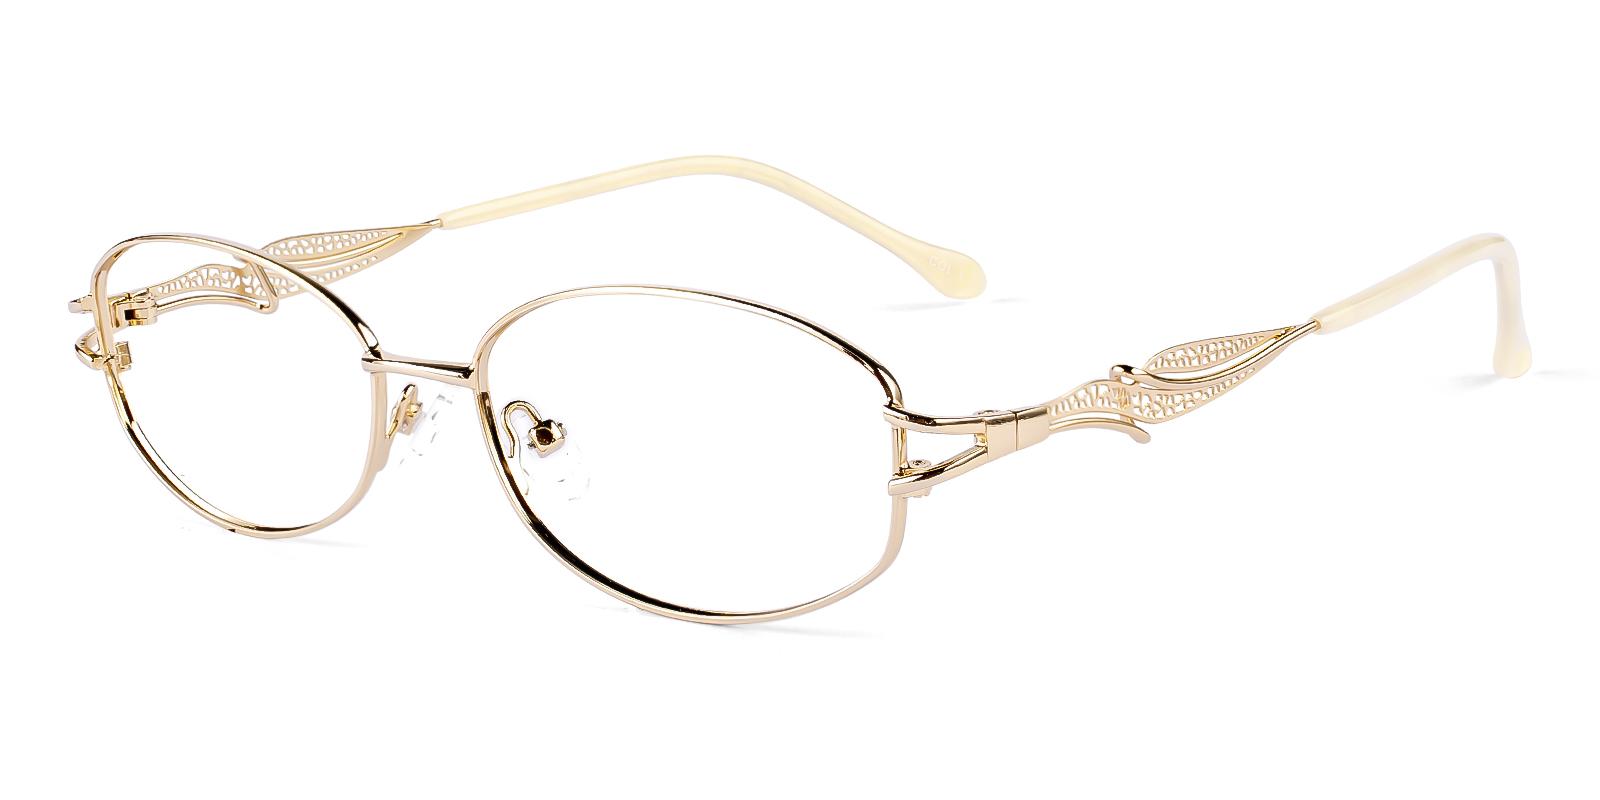 Glplious Gold Metal Eyeglasses , NosePads Frames from ABBE Glasses